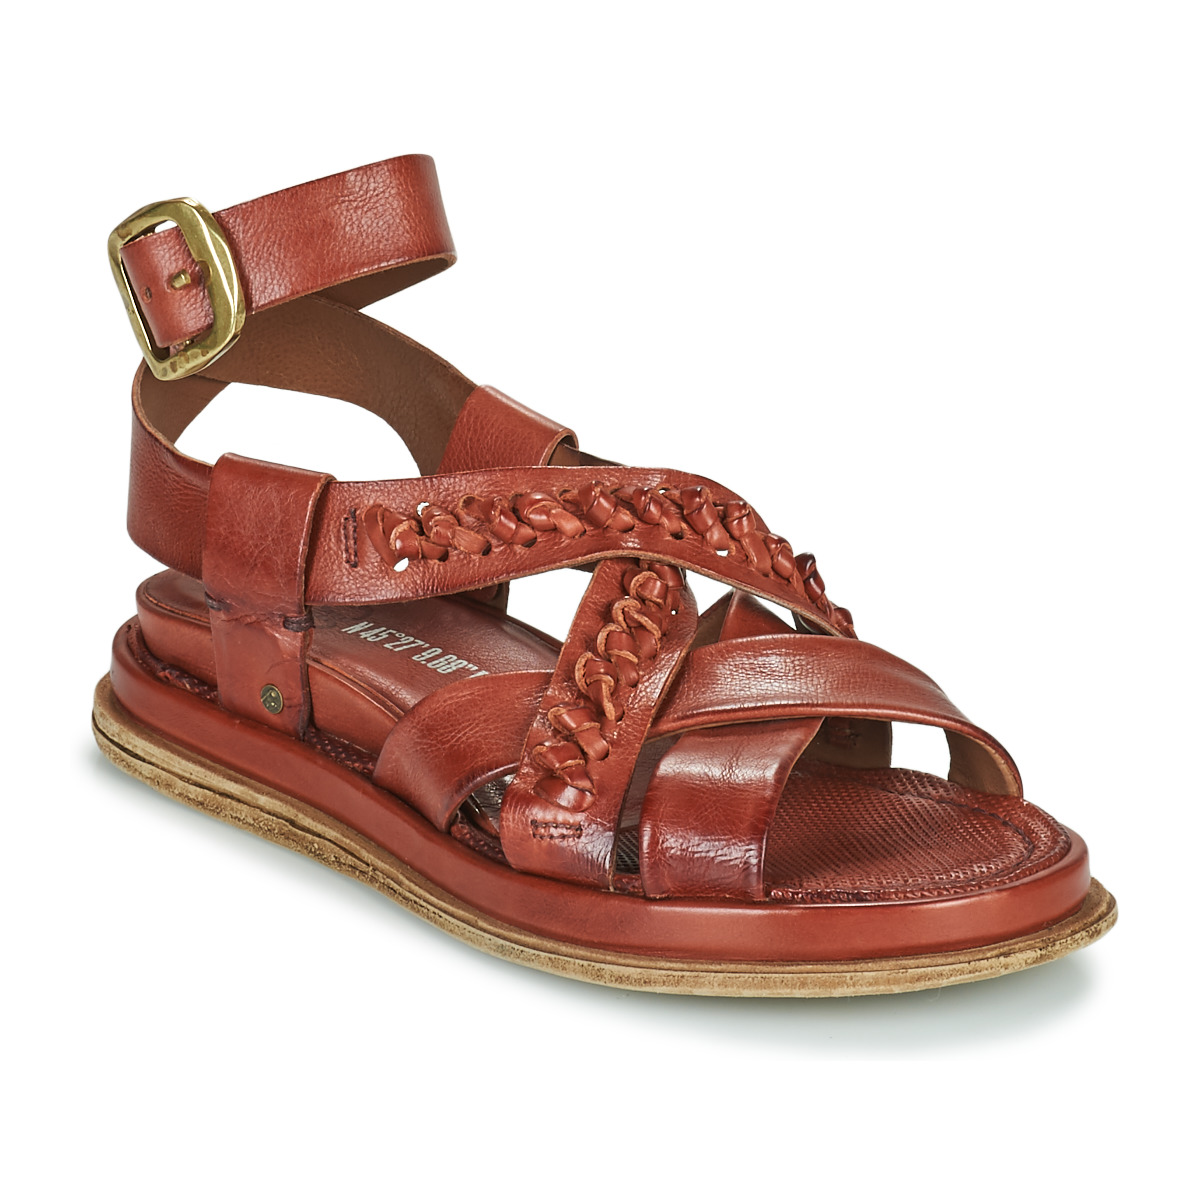 airstep / a.s.98  pola cross  women's sandals in bordeaux